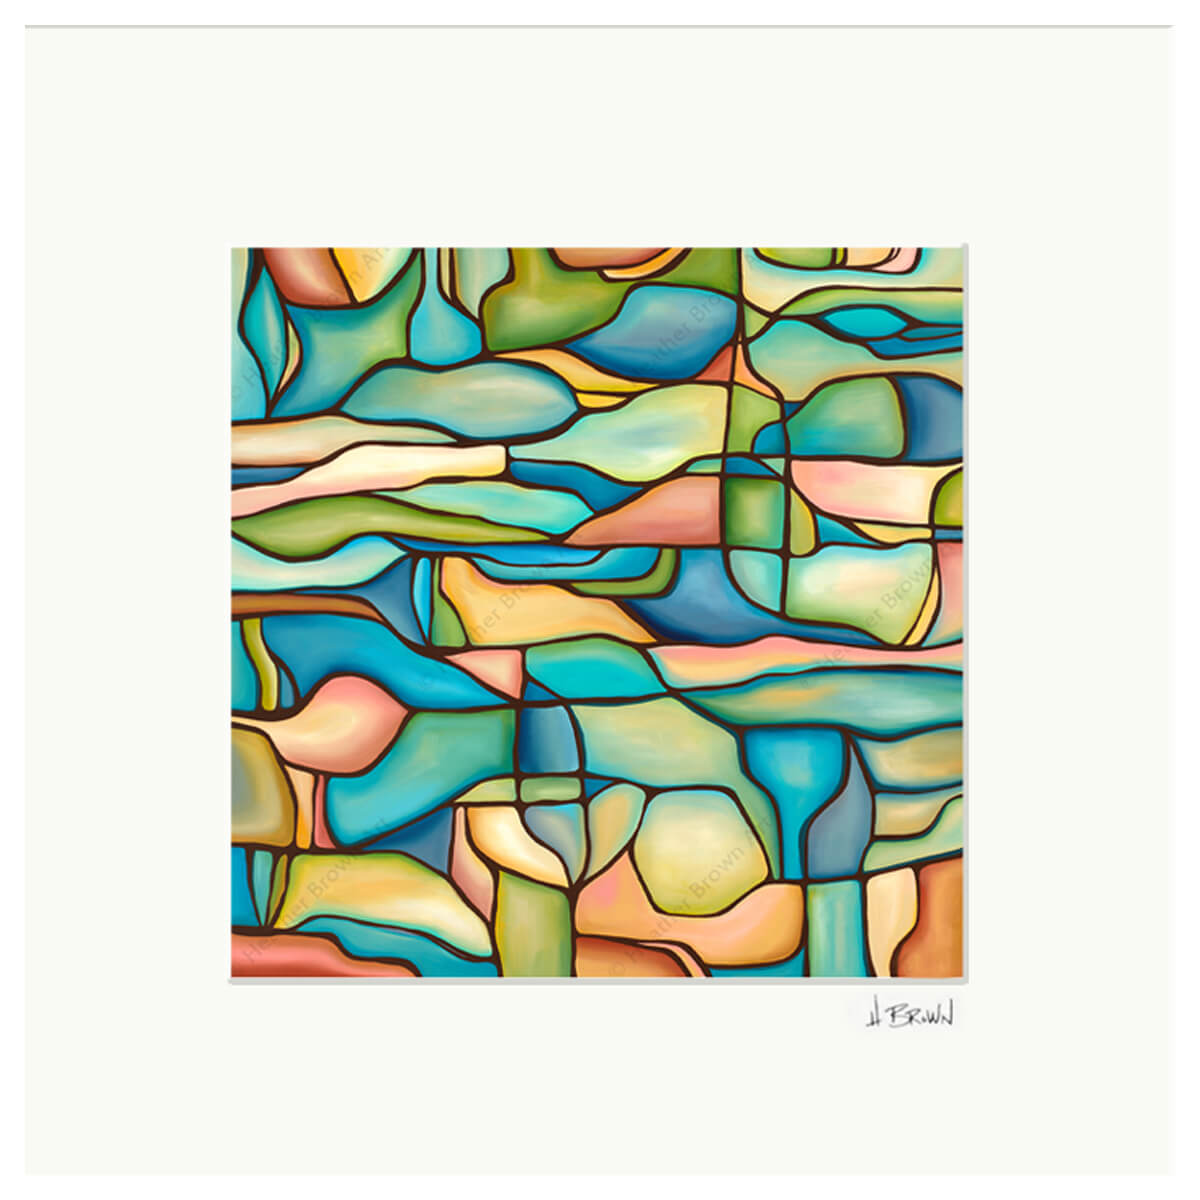 heather brown matted print abstract artwork